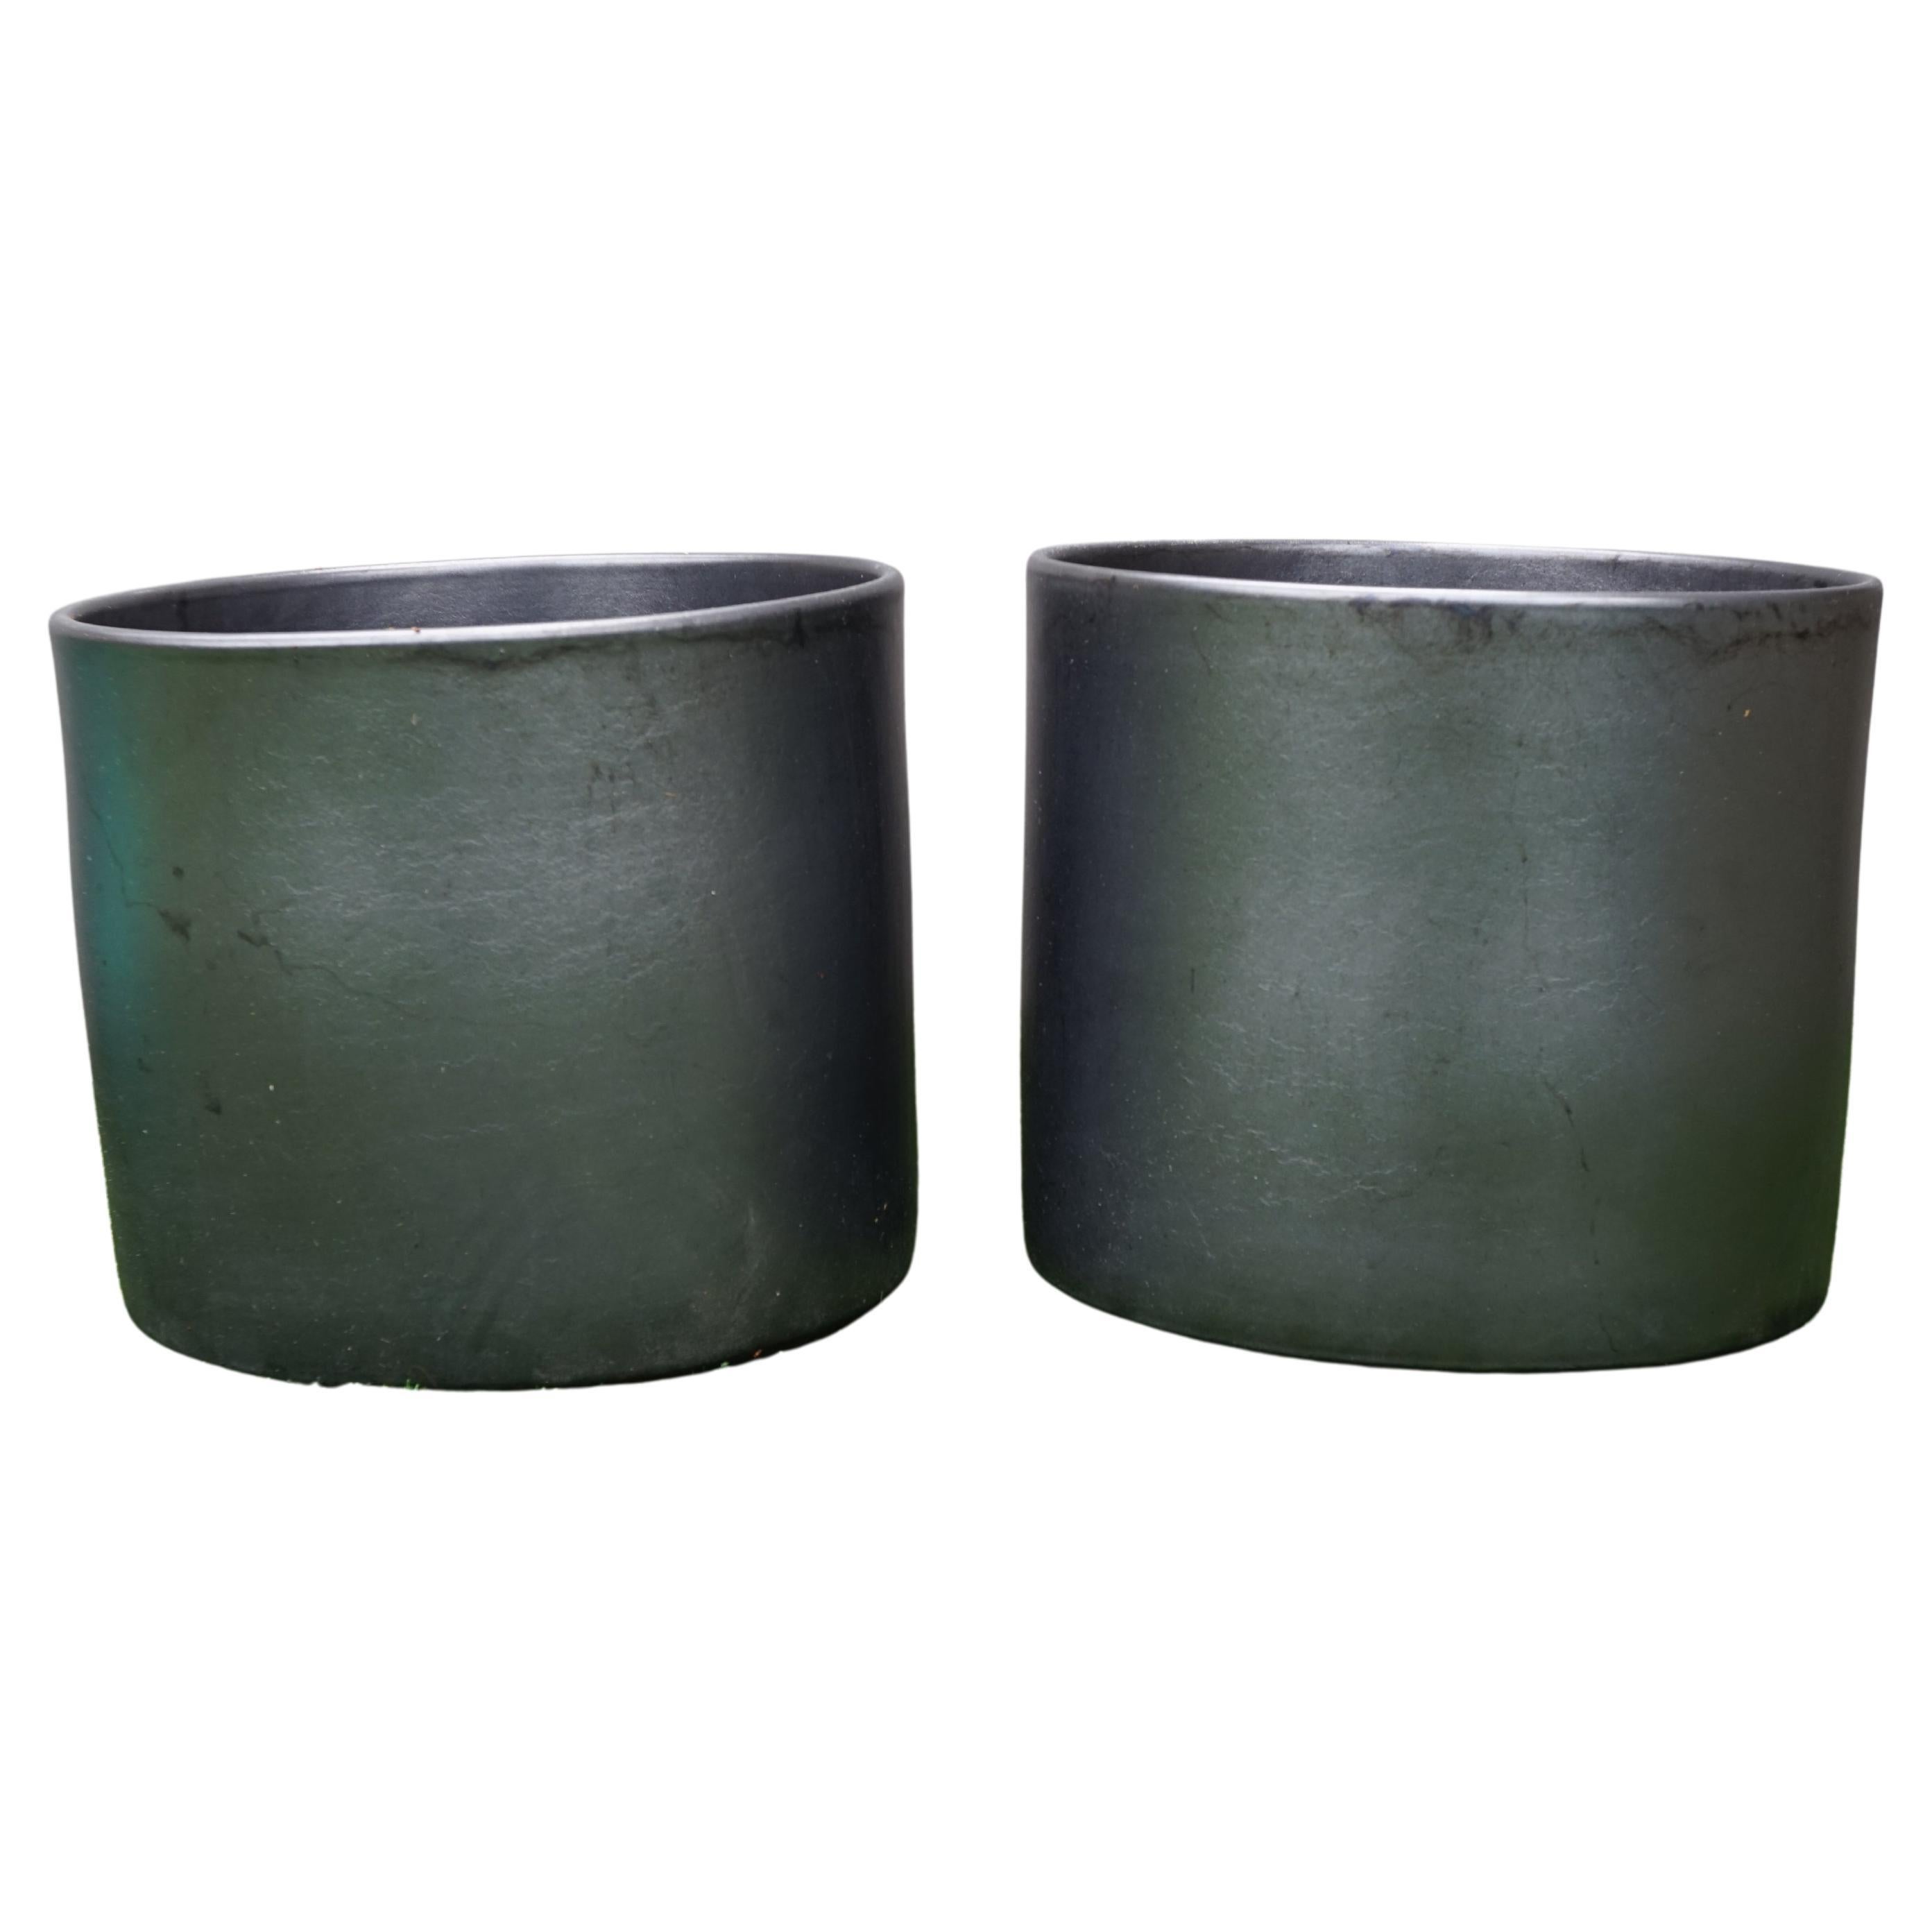 Midcentury Architectural Pottery Gunmetal Ceramic Planters by Gainey 'Set of 2' For Sale